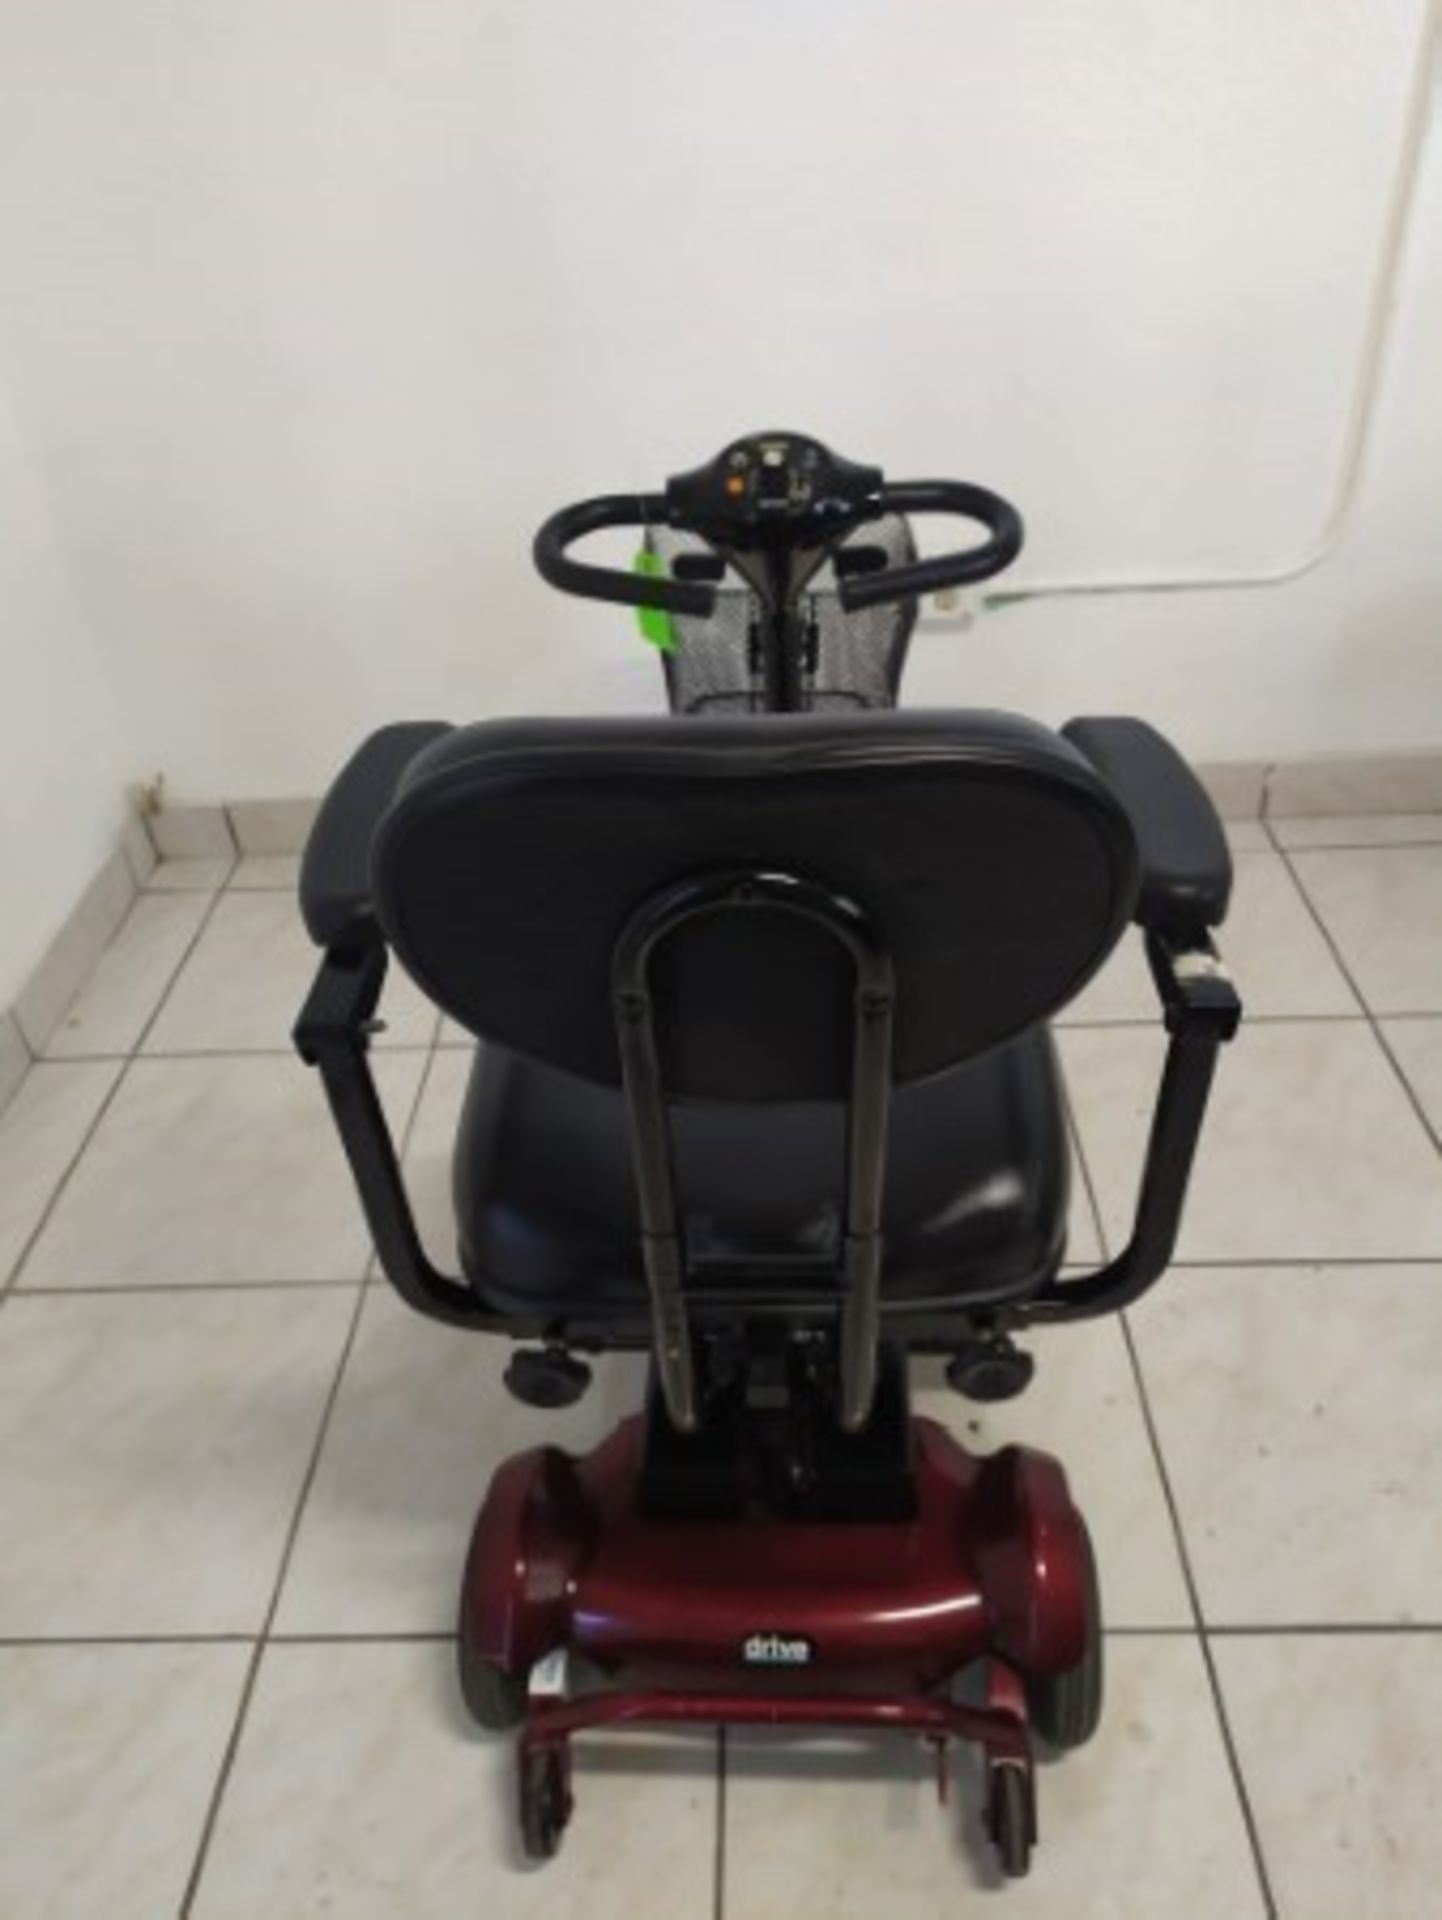 2009 DRIVE HAWK 3-WHEEL SCOOTER WITH BASKET - RED - 250LB CAPACITY - SERIAL No. 2A06090137PQ (NO CHA - Image 3 of 6